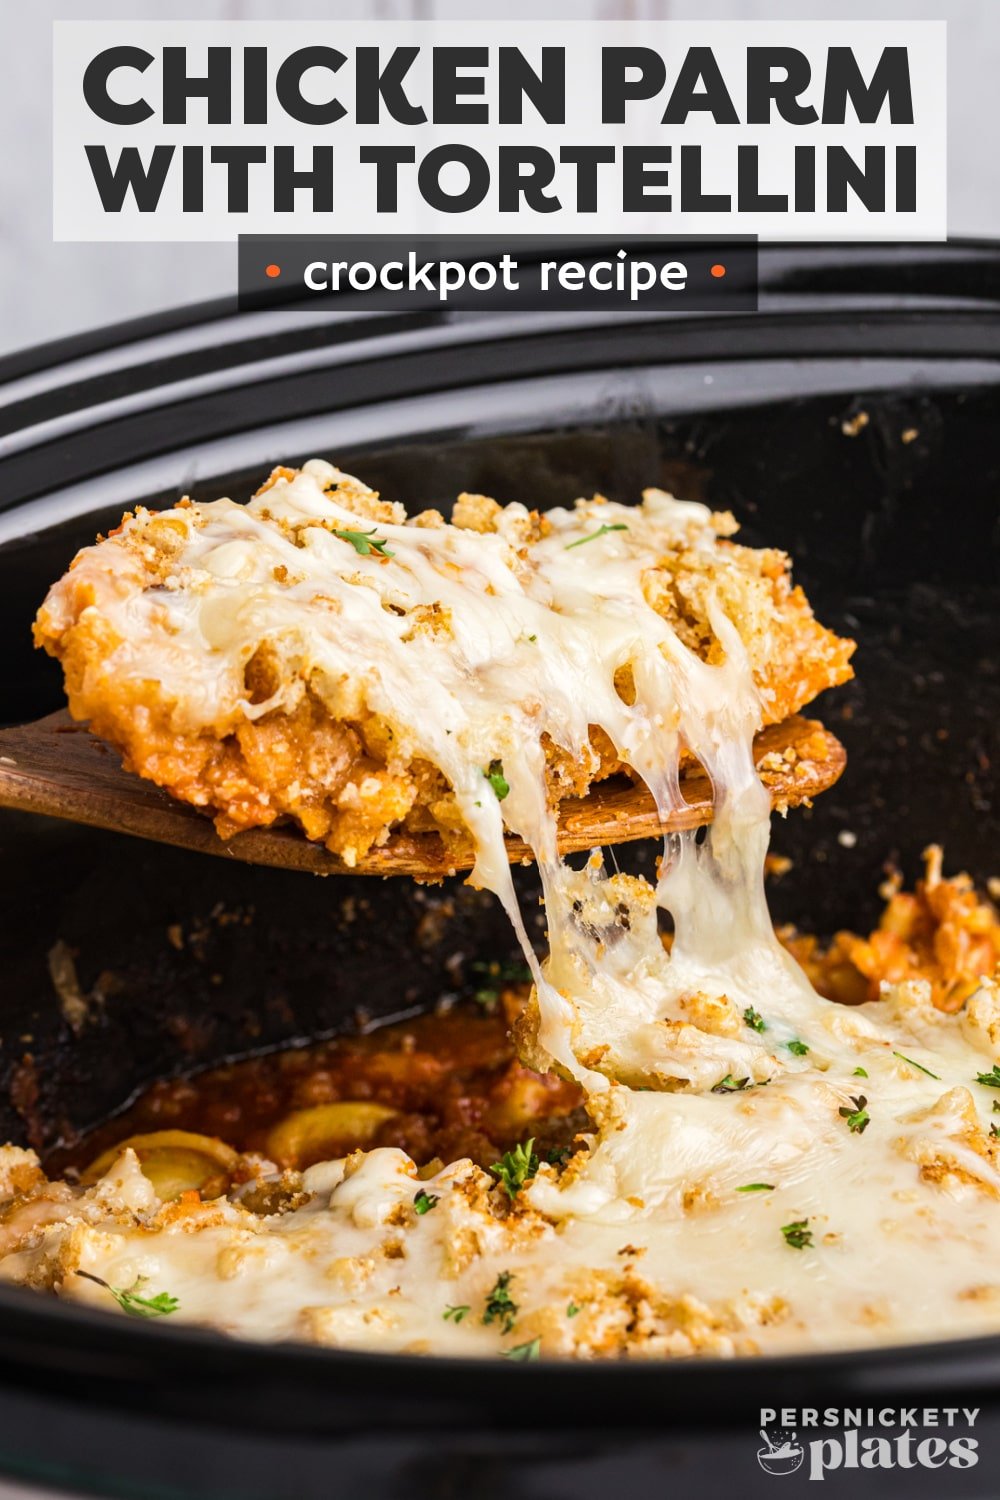 Slow Cooker Chicken Parmesan is a super easy take on a family favorite. Slow cook chicken in your favorite sauce, top with breadcrumbs and cheese, and serve over cheese tortellini. Your entire meal is made right in the slow cooker! | www.persnicketyplates.com